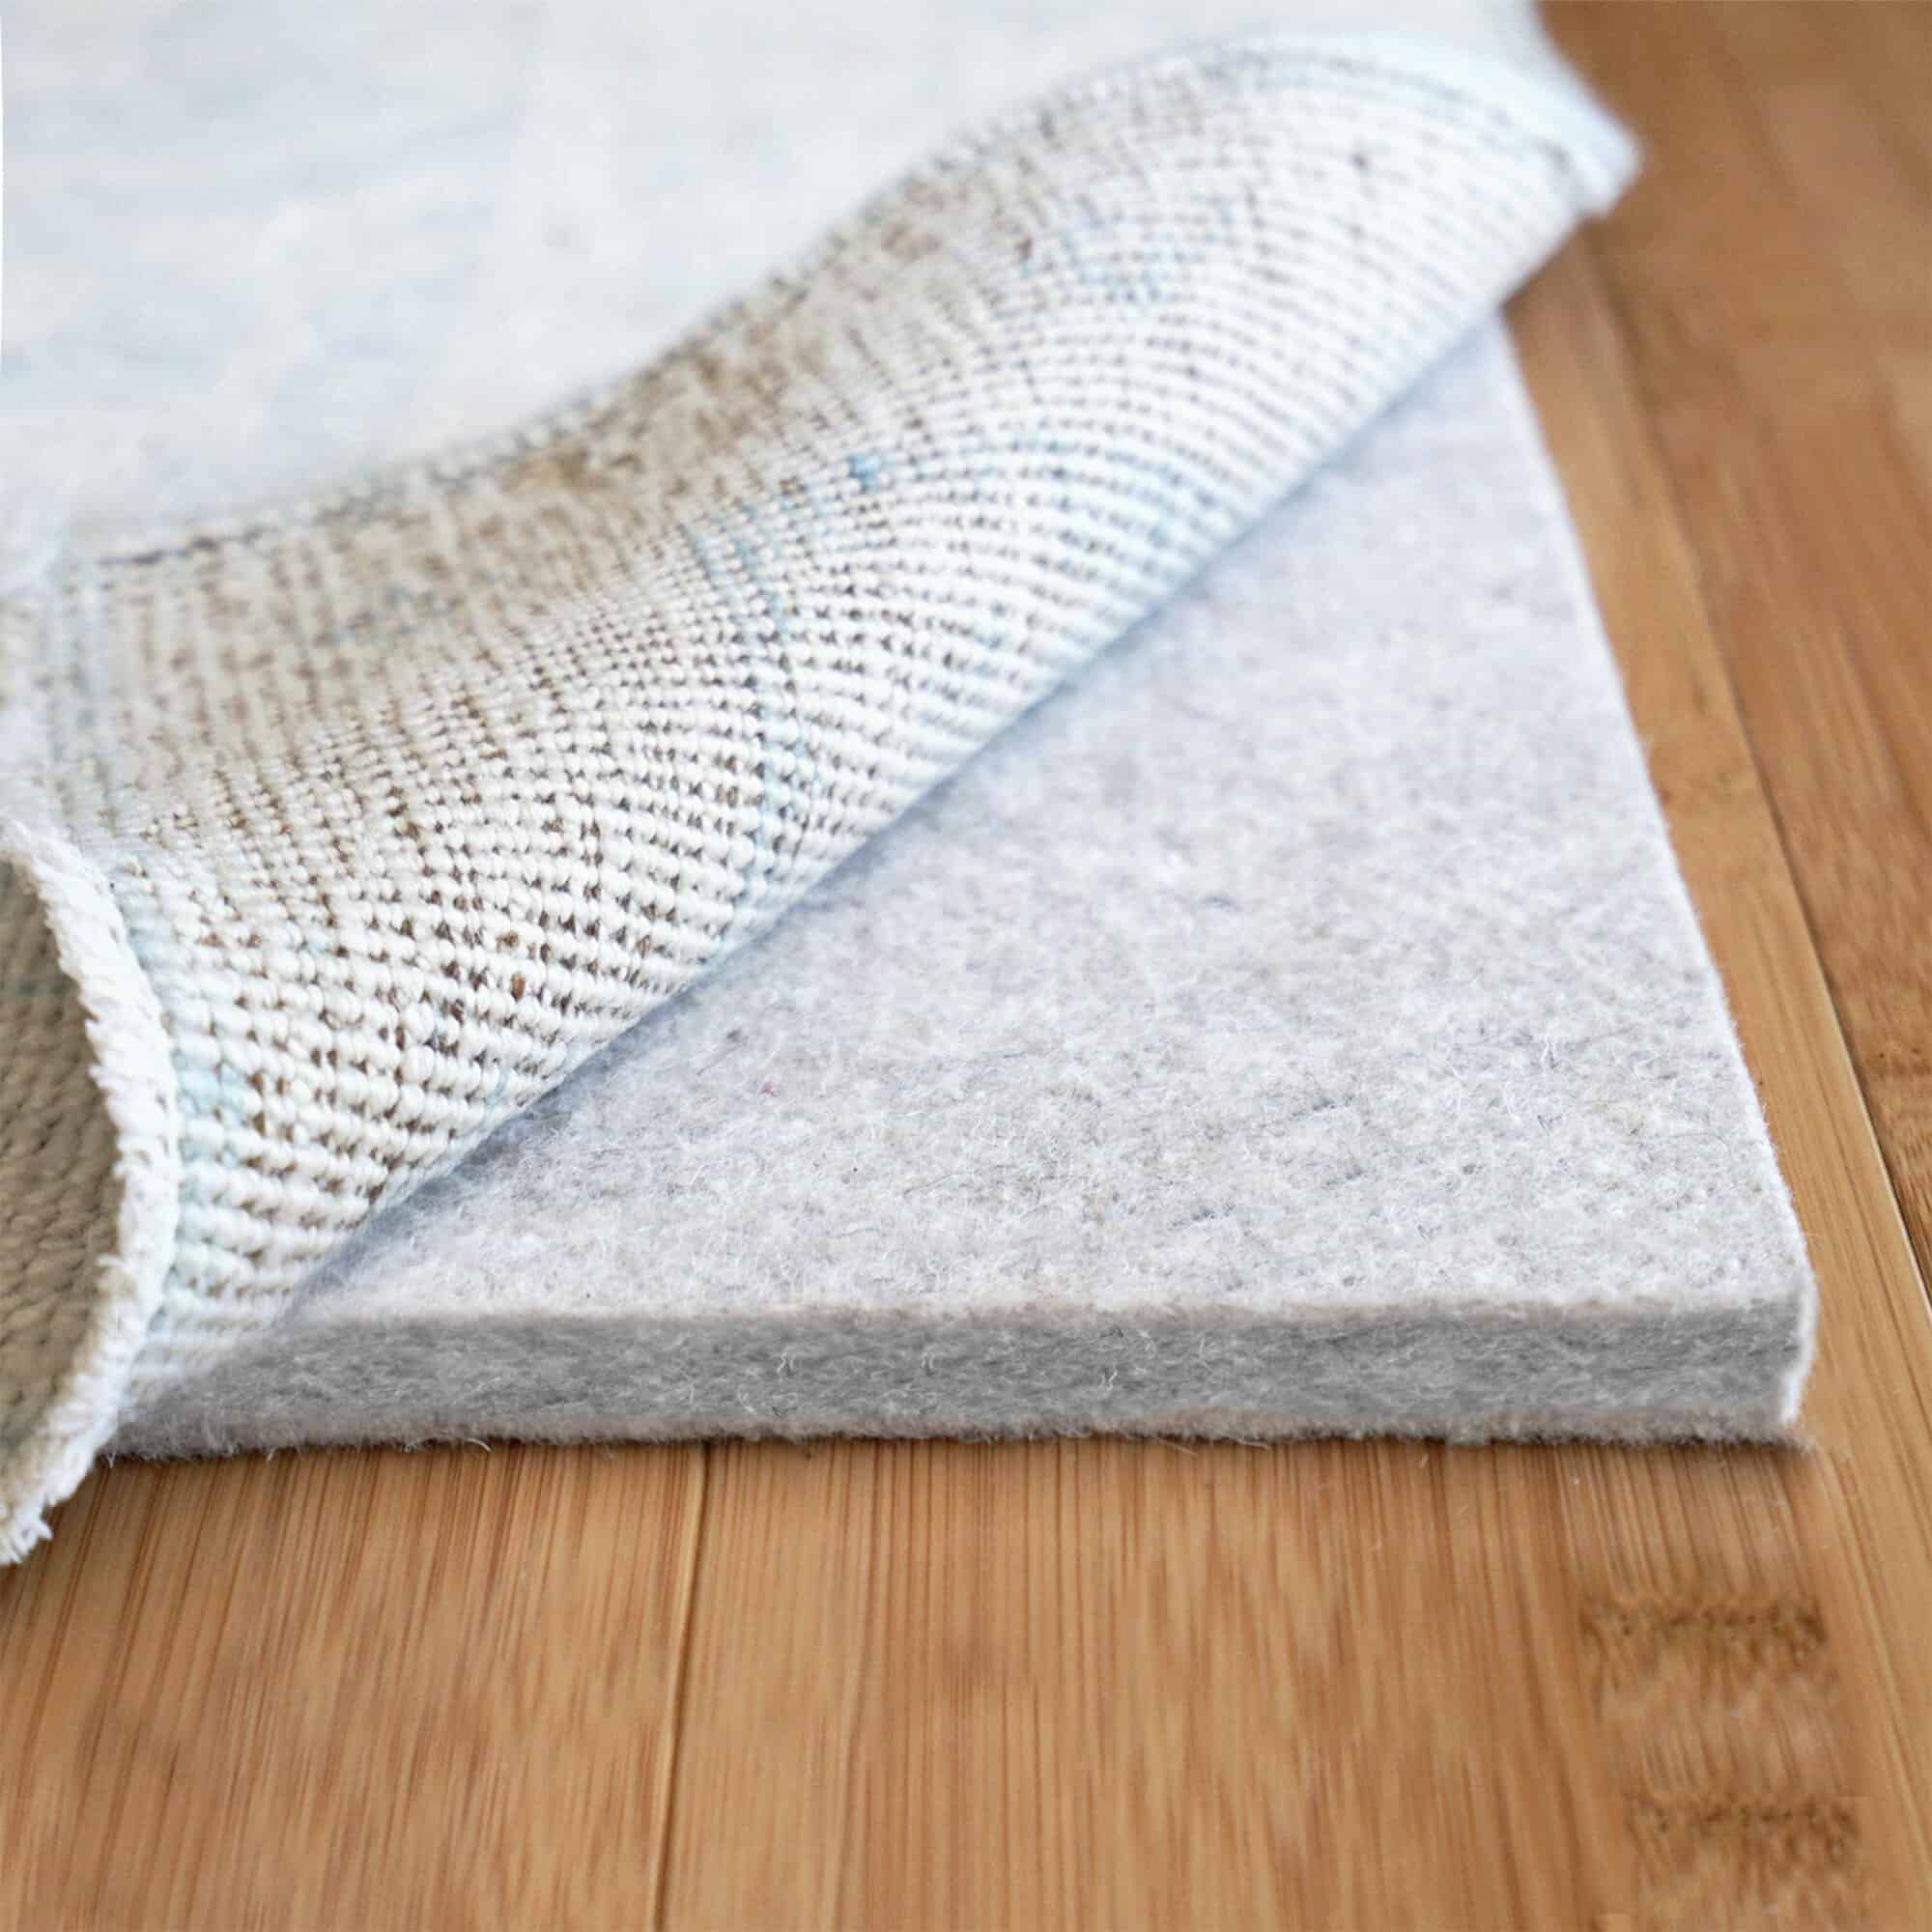 Felt Cushioned Rugs Are Perfect If You Need Extra Warmth